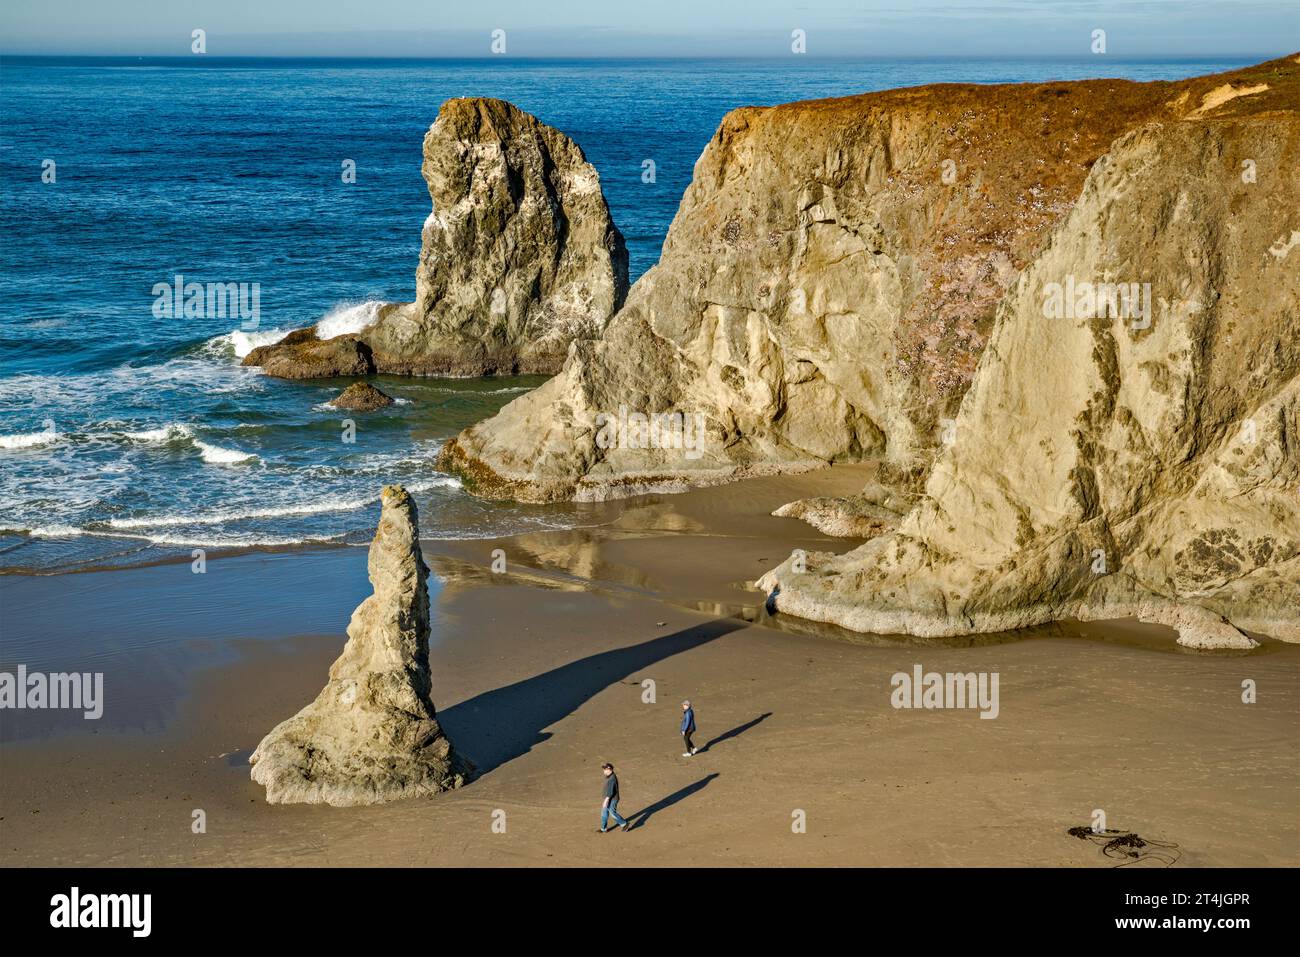 Cathedral Rock, Grave Point, Bandon Beach, Blick vom Face Rock Scenic Viewpoint, Oregon Islands National Wildlife Refuge, Bandon, Oregon, USA Stockfoto